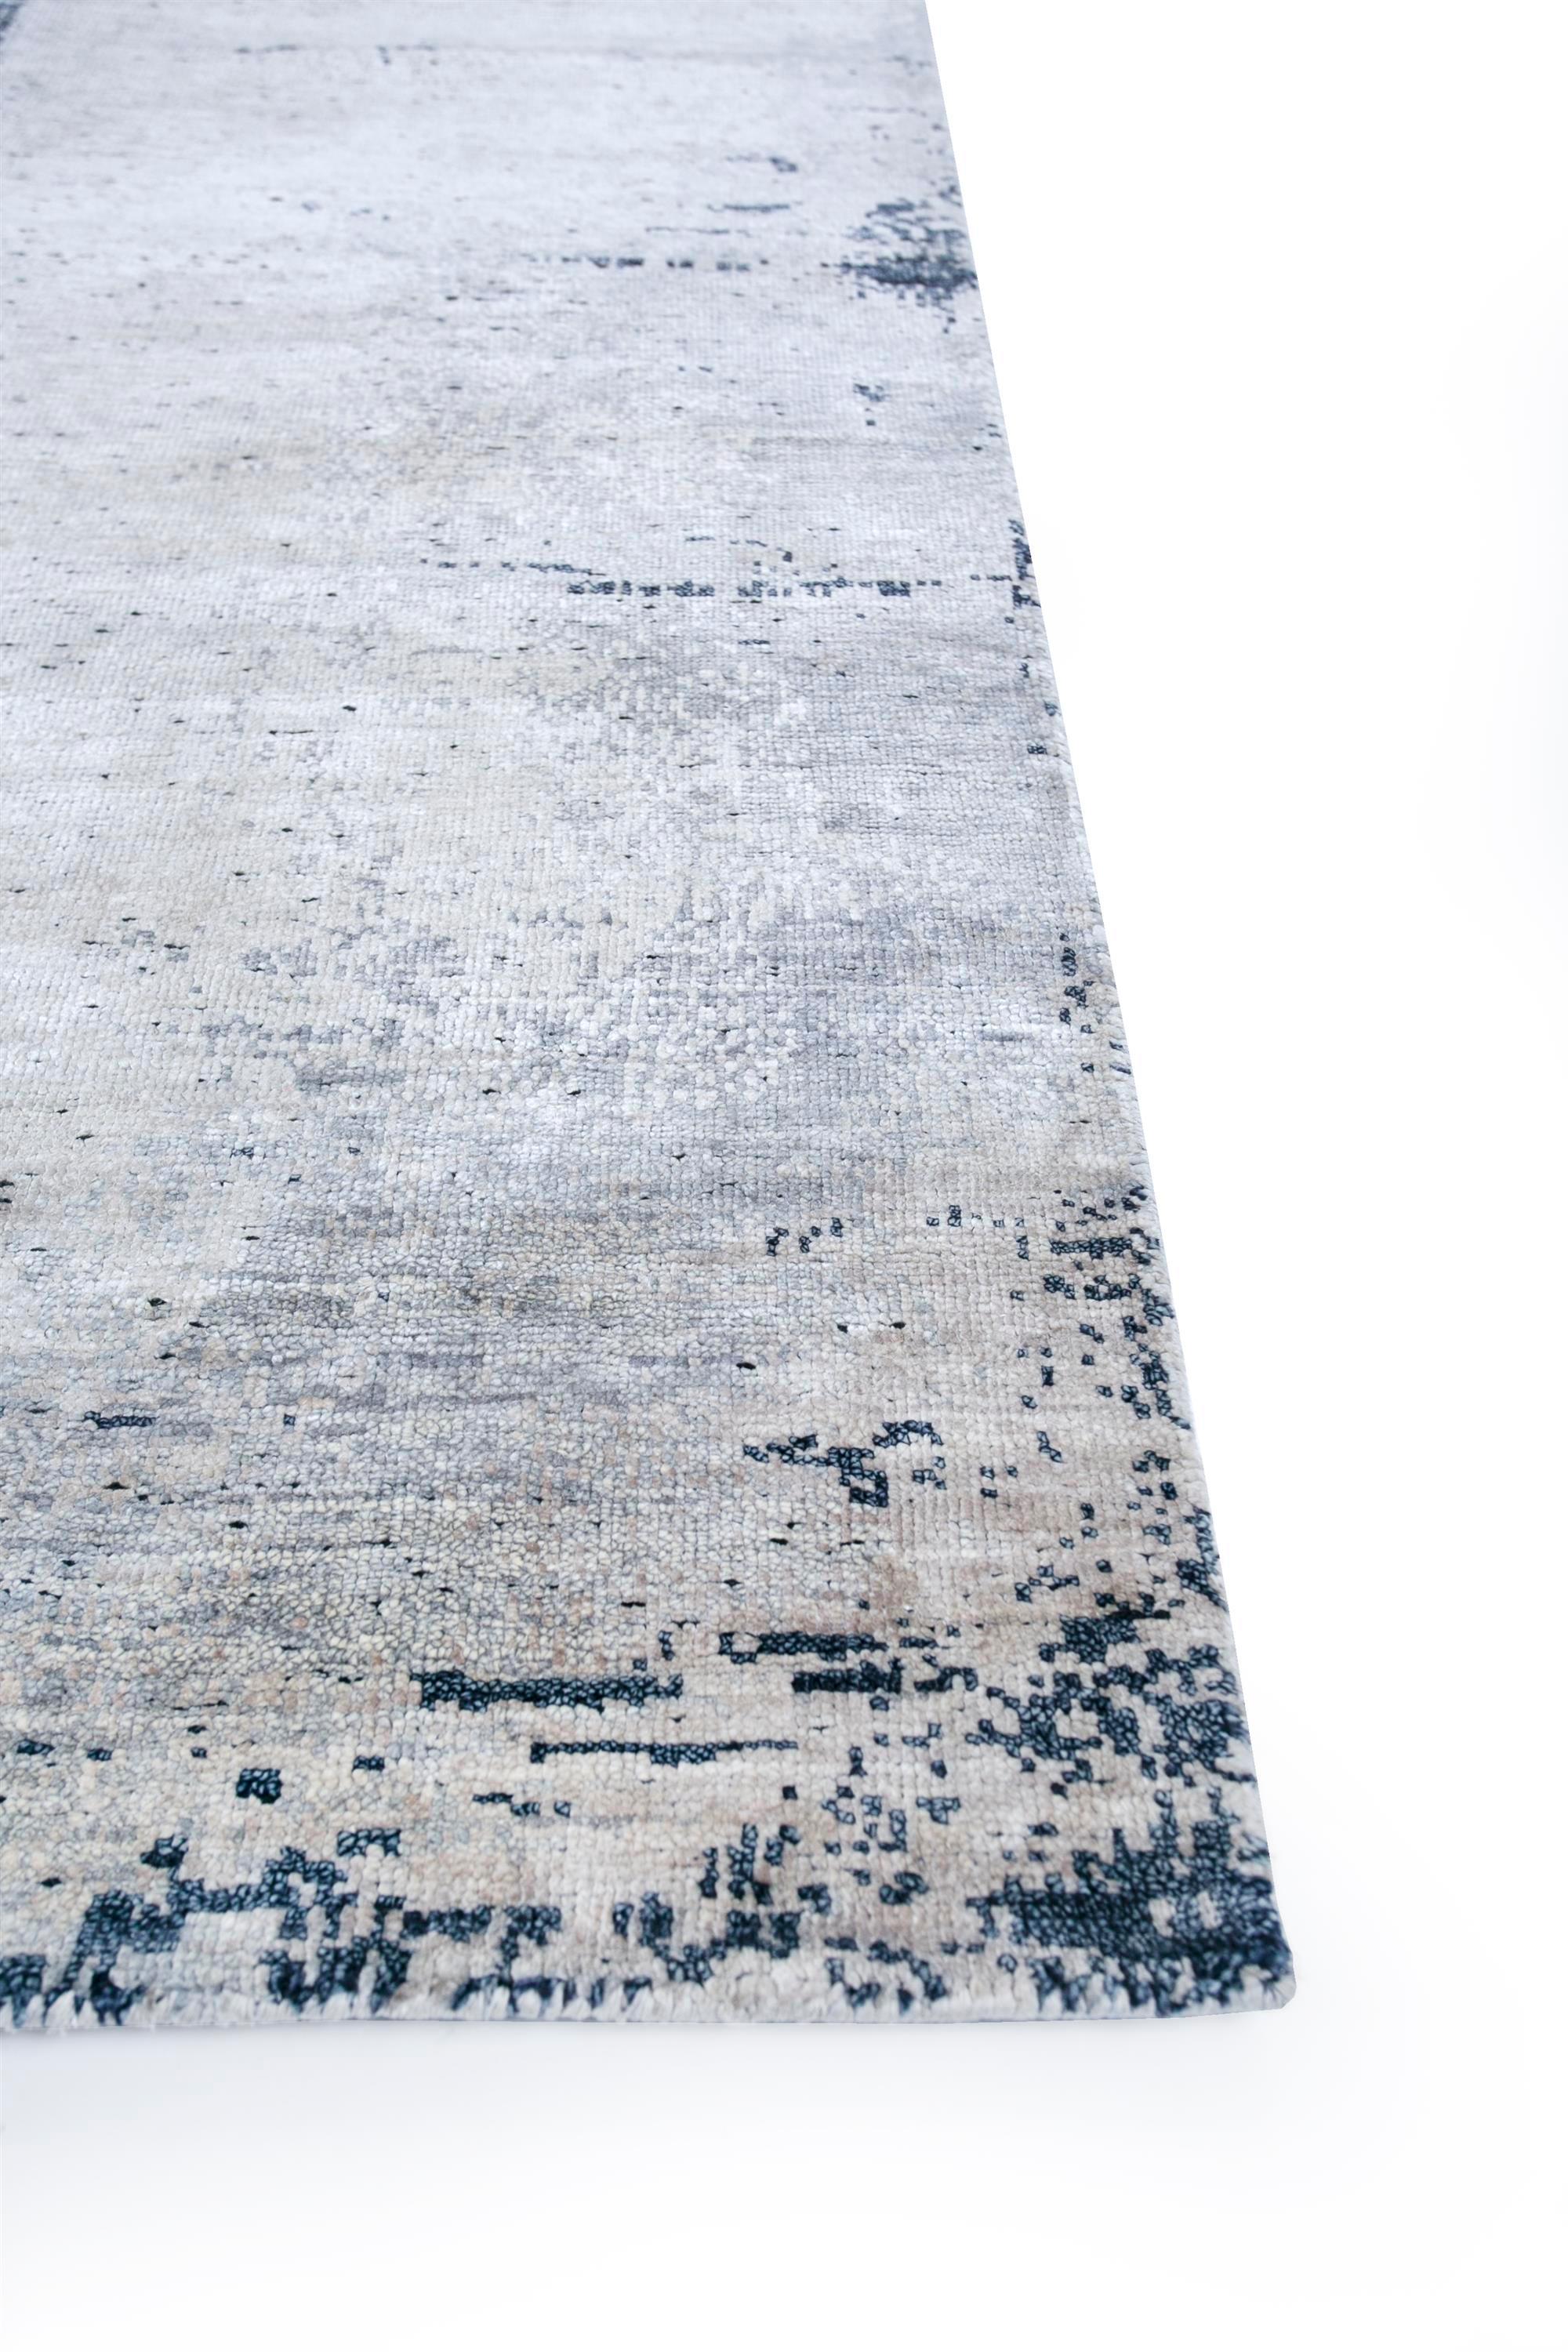 Have you discovered the transformative power of tone-on-tone palettes? Meet this modern hand-knotted rug , exquisitely crafted in rural India. With a serene white base and a linen white border, this rug instantly uplifts any space, adding warmth and